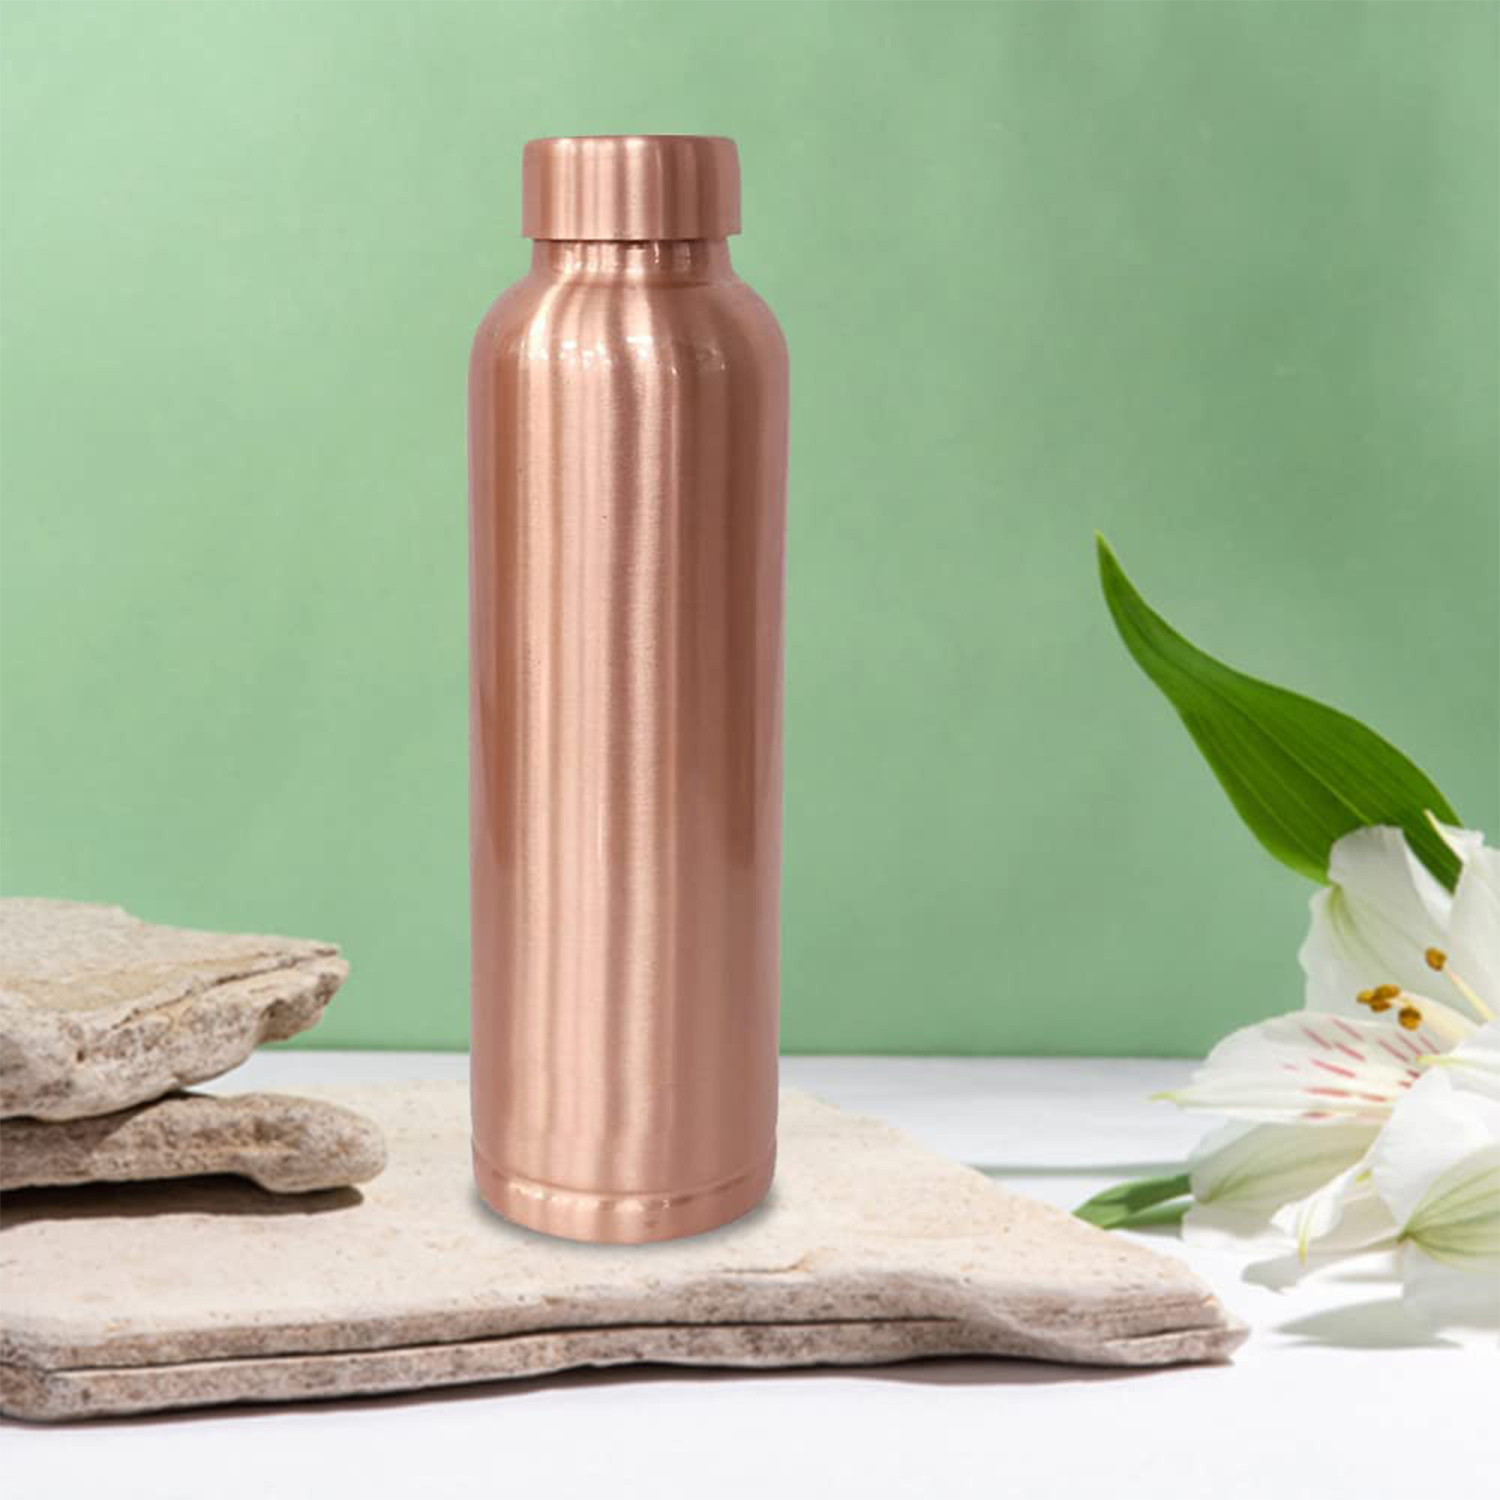 Kuber Industries Copper Water Bottle 950 ml | 100% Pure Copper Water Bottle I Leak Proof, Rust Proof I Copper Bottle For Home, School & Office (Pack of 1)